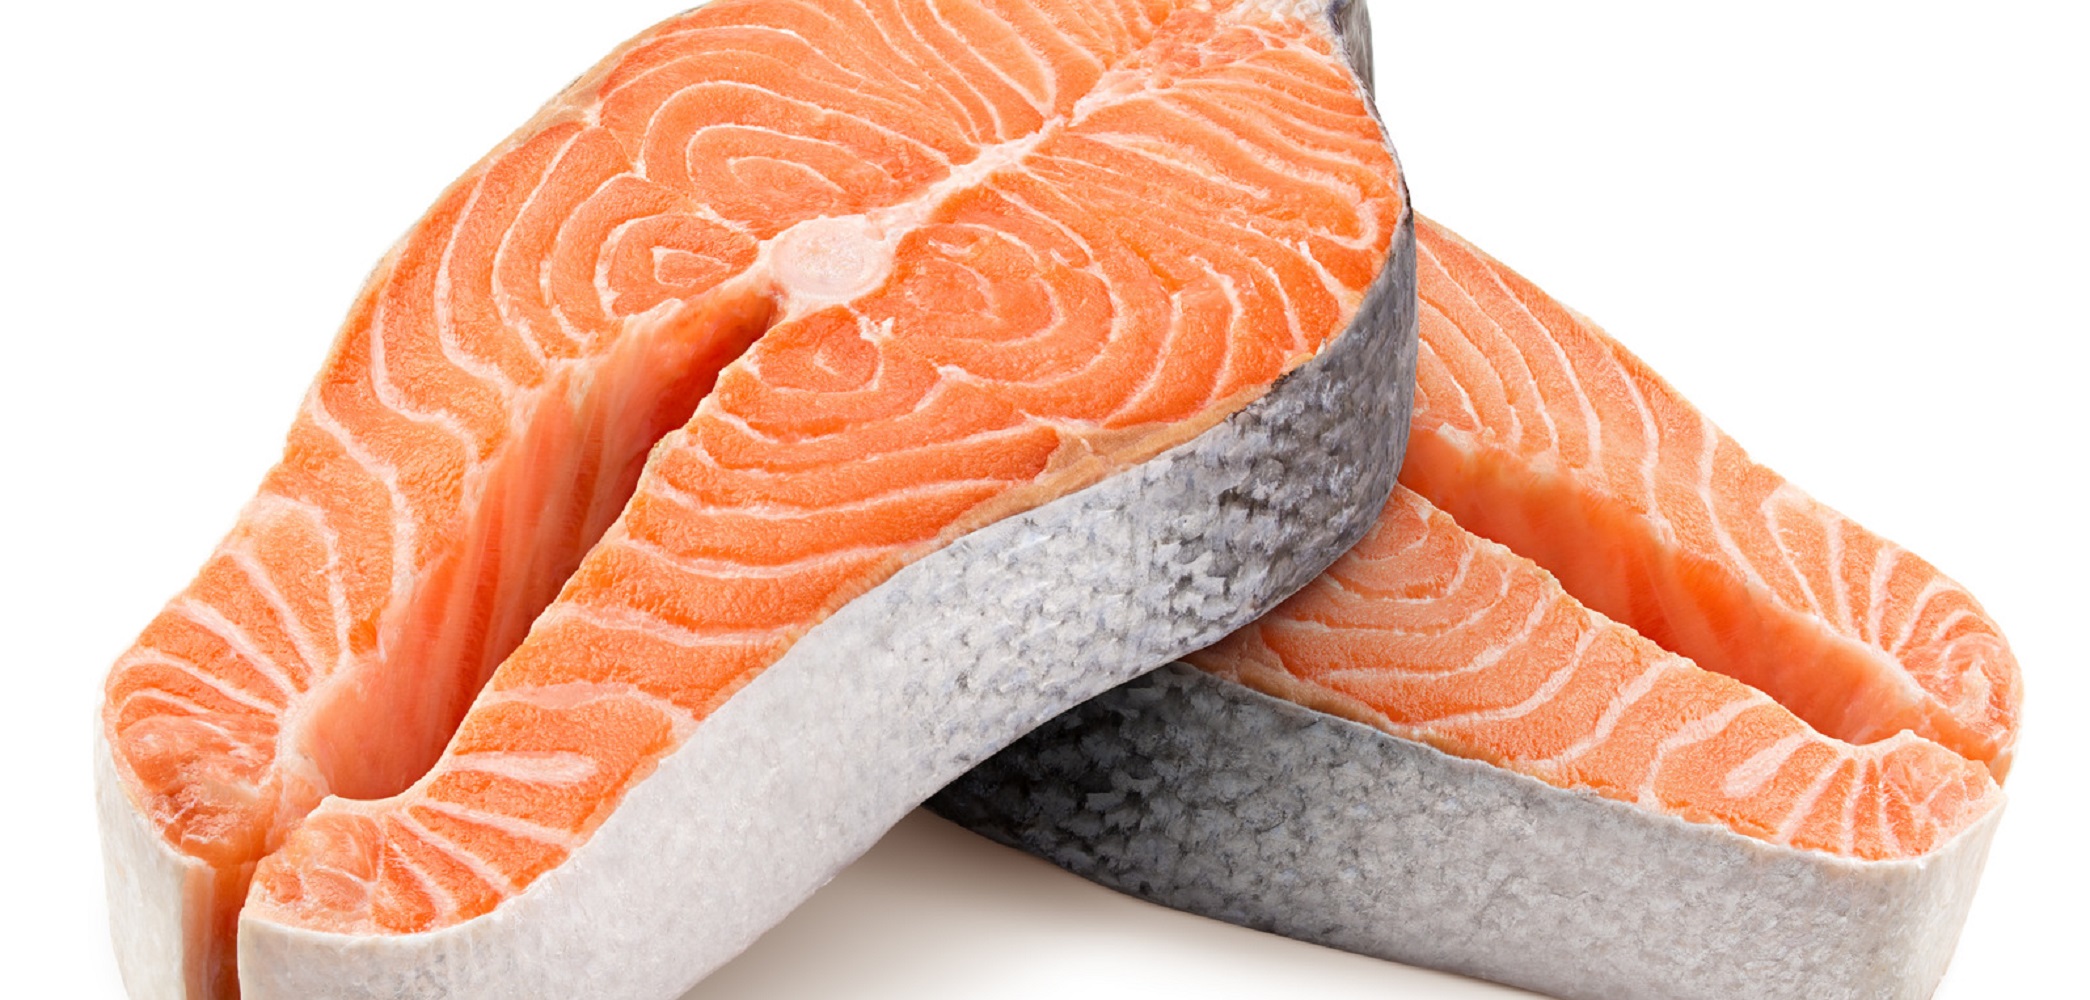 Health: Adding Fish to Your Meals